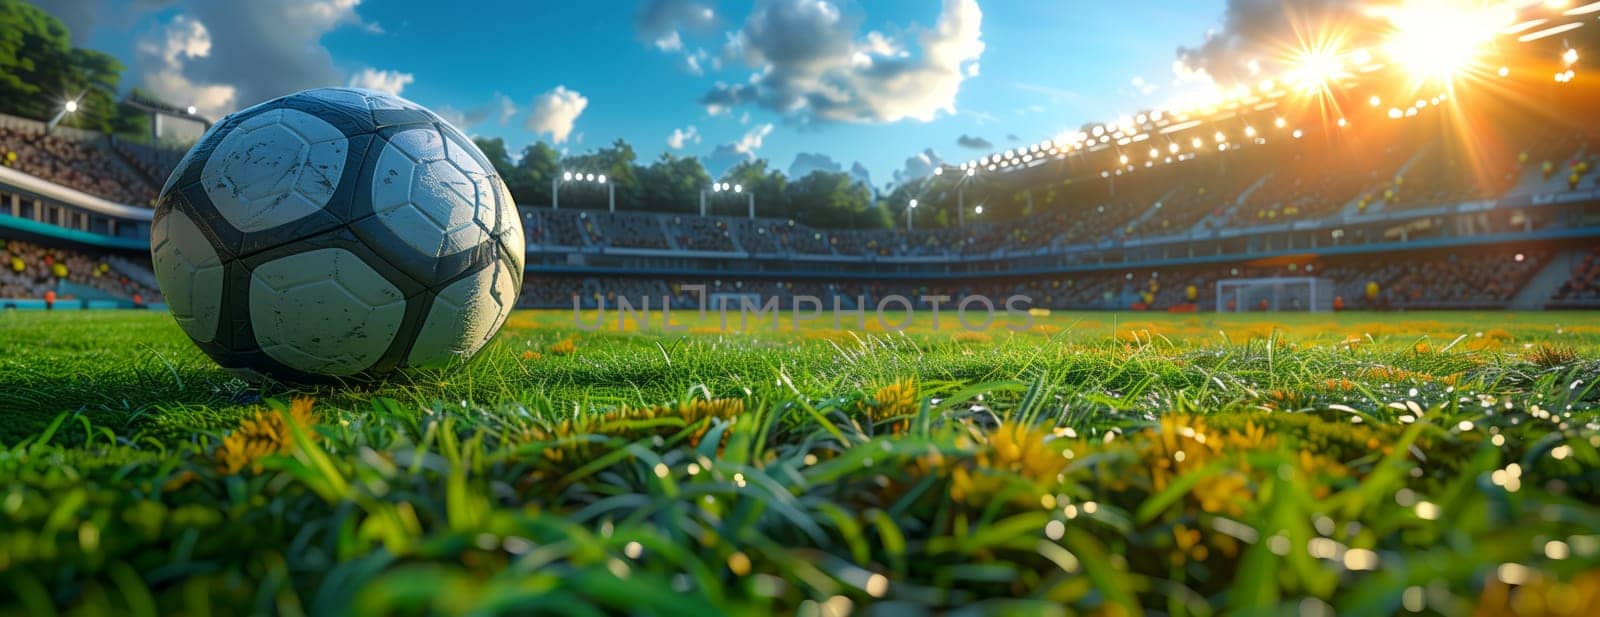 A sports equipment, soccer ball, is resting on the grass of a soccer field, surrounded by a beautiful natural landscape of meadows and skies